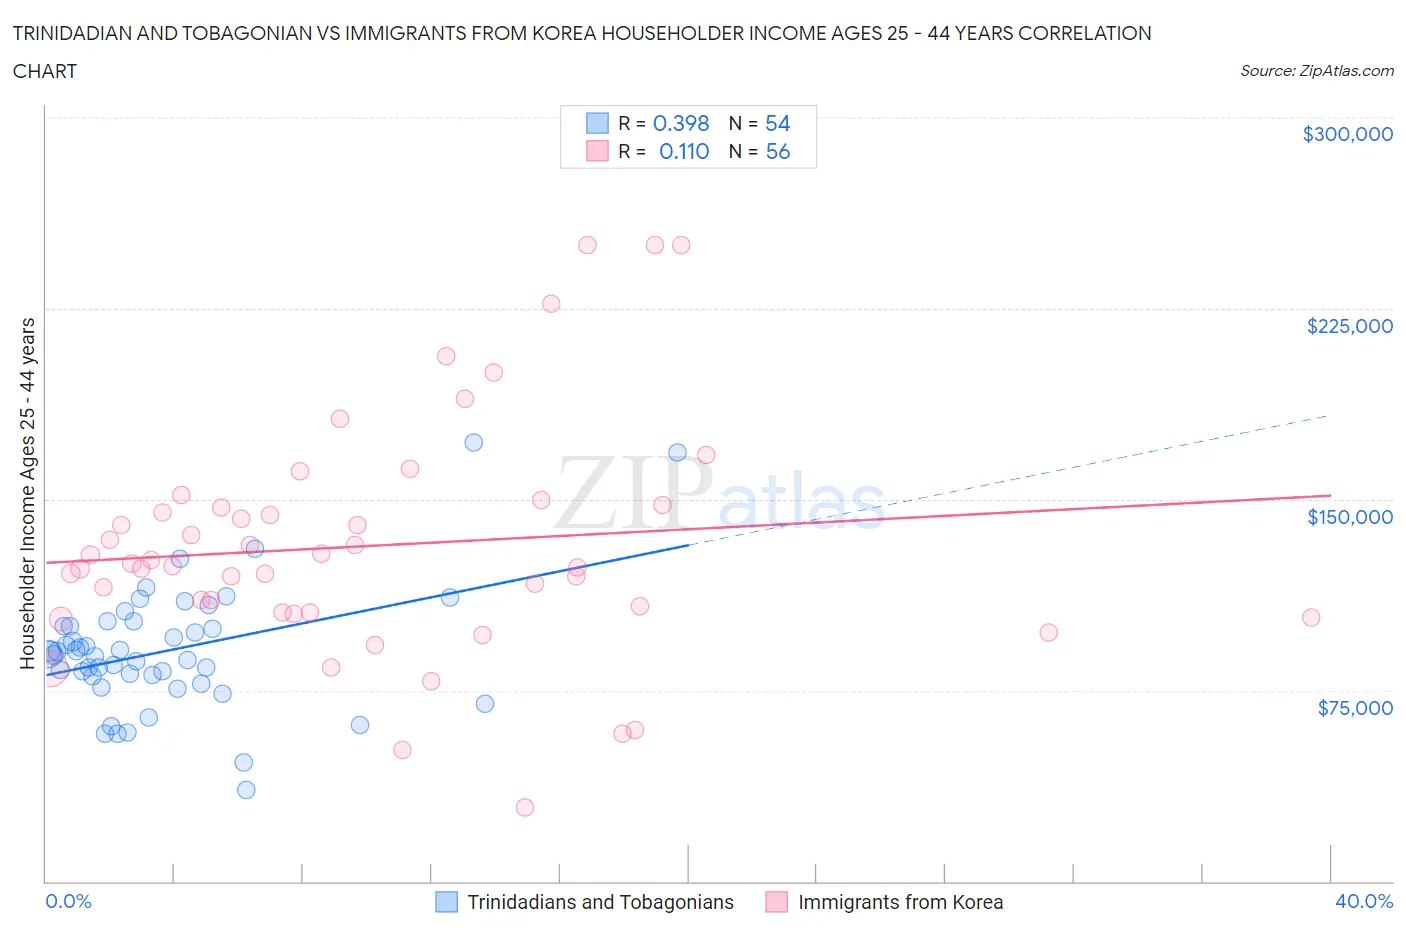 Trinidadian and Tobagonian vs Immigrants from Korea Householder Income Ages 25 - 44 years